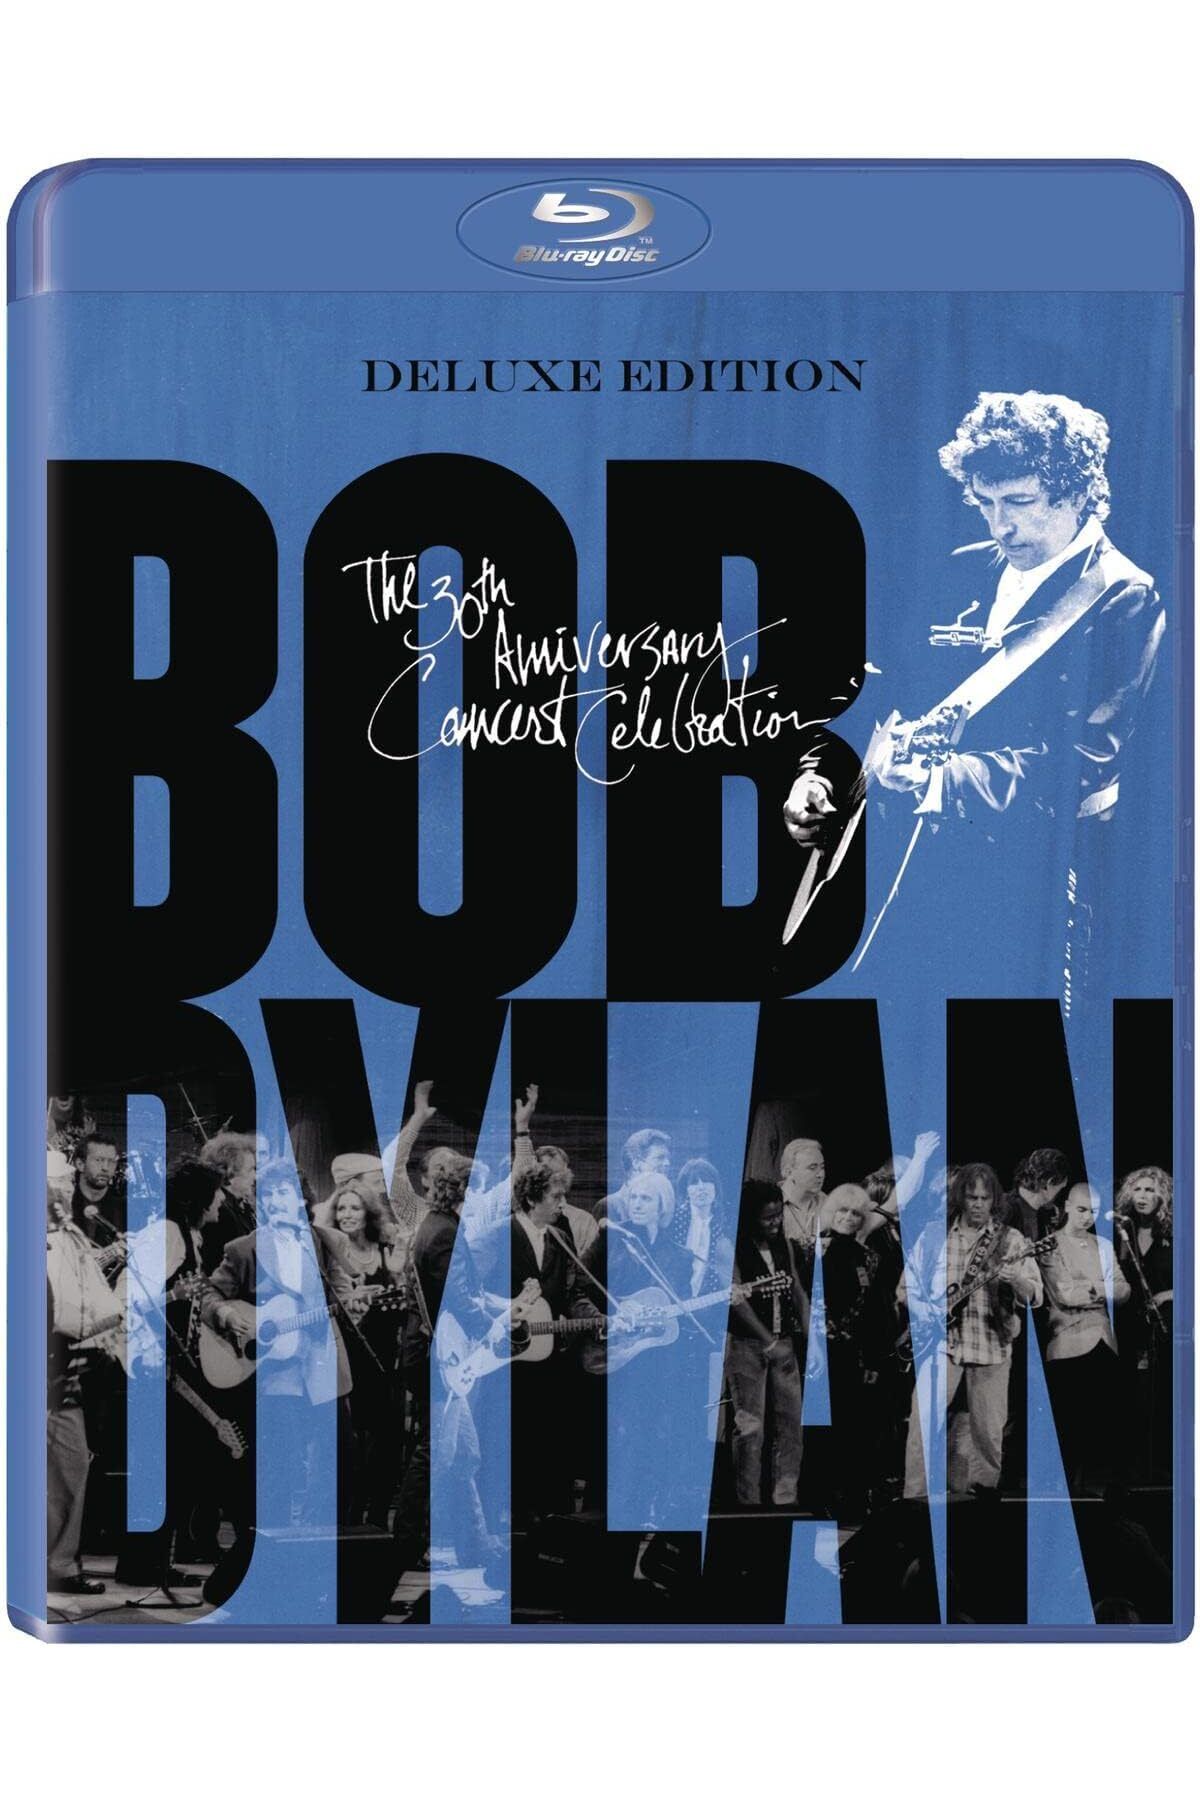 Sony Music BLURAY - Bob Dylan - 30th Anniversary Concert Celebration [Deluxe Edition]